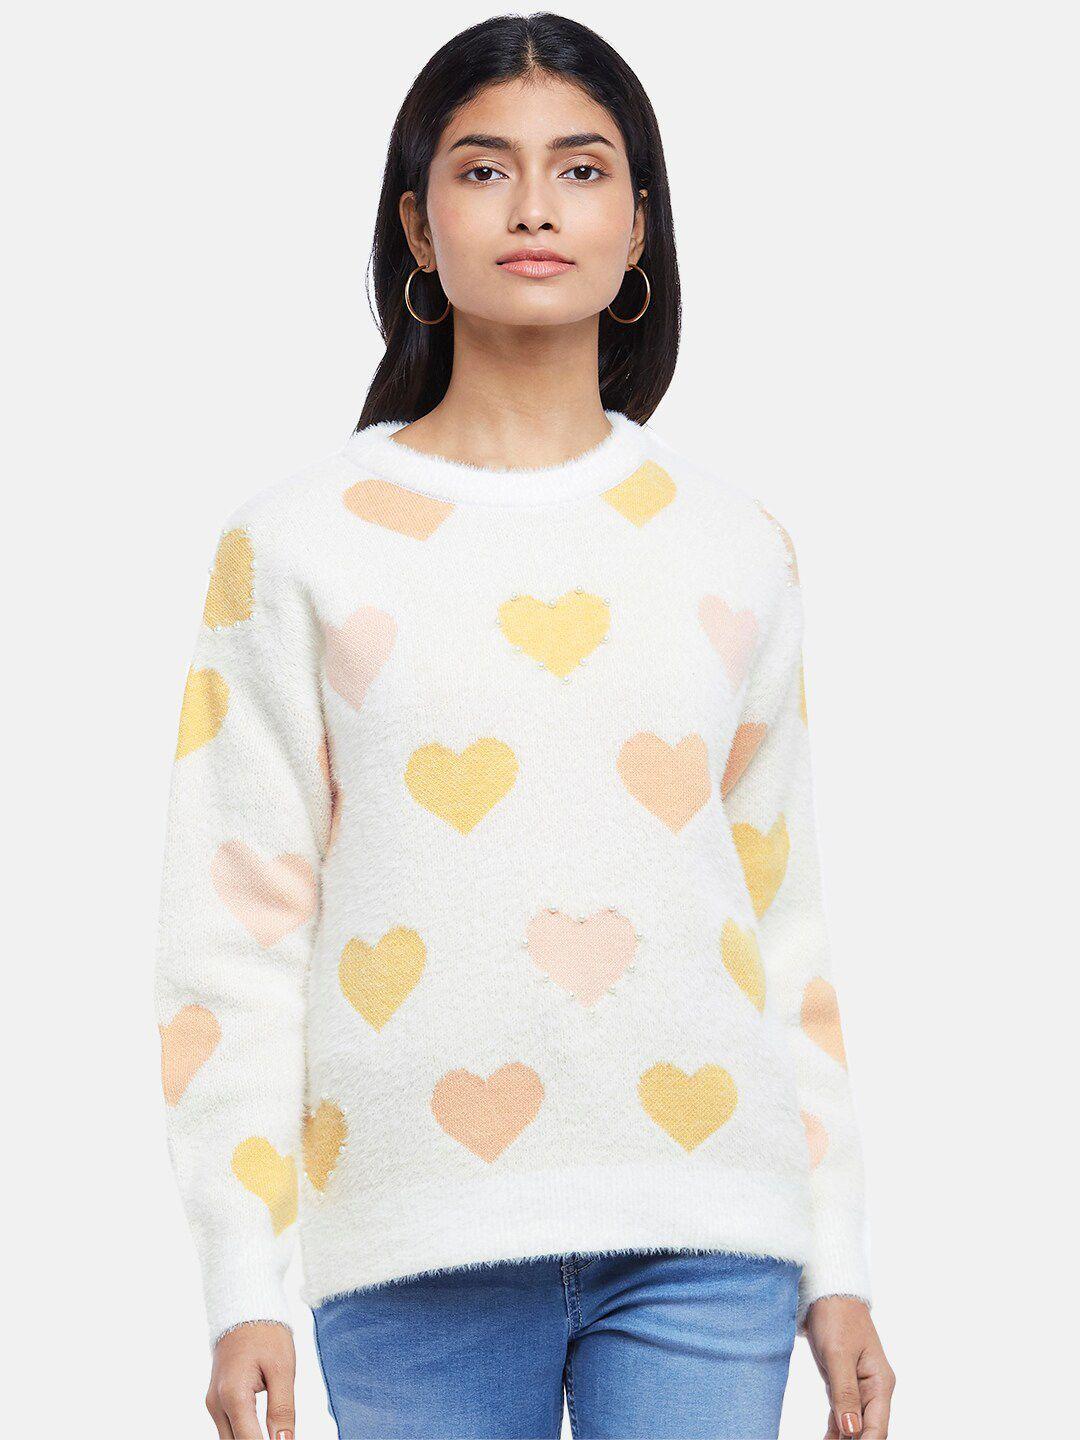 honey-by-pantaloons-women-off-white-&-yellow-printed-pullover-sweaters